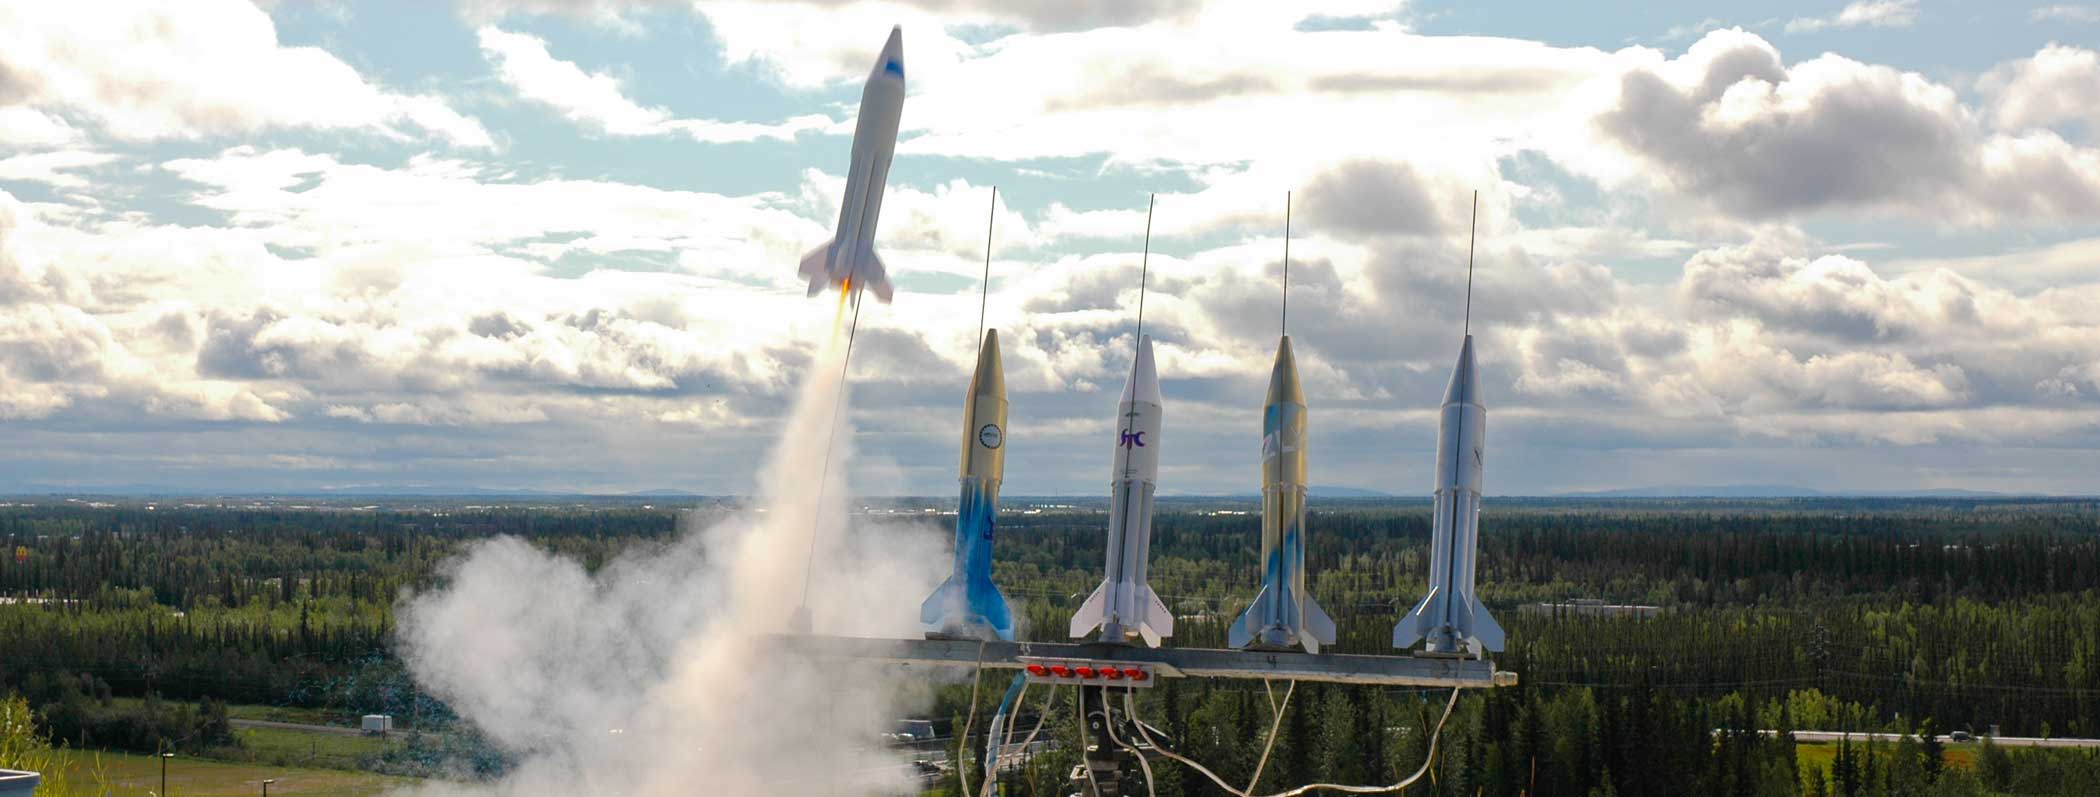 Five small rockets in a row are shown with the first rocket mid-launch